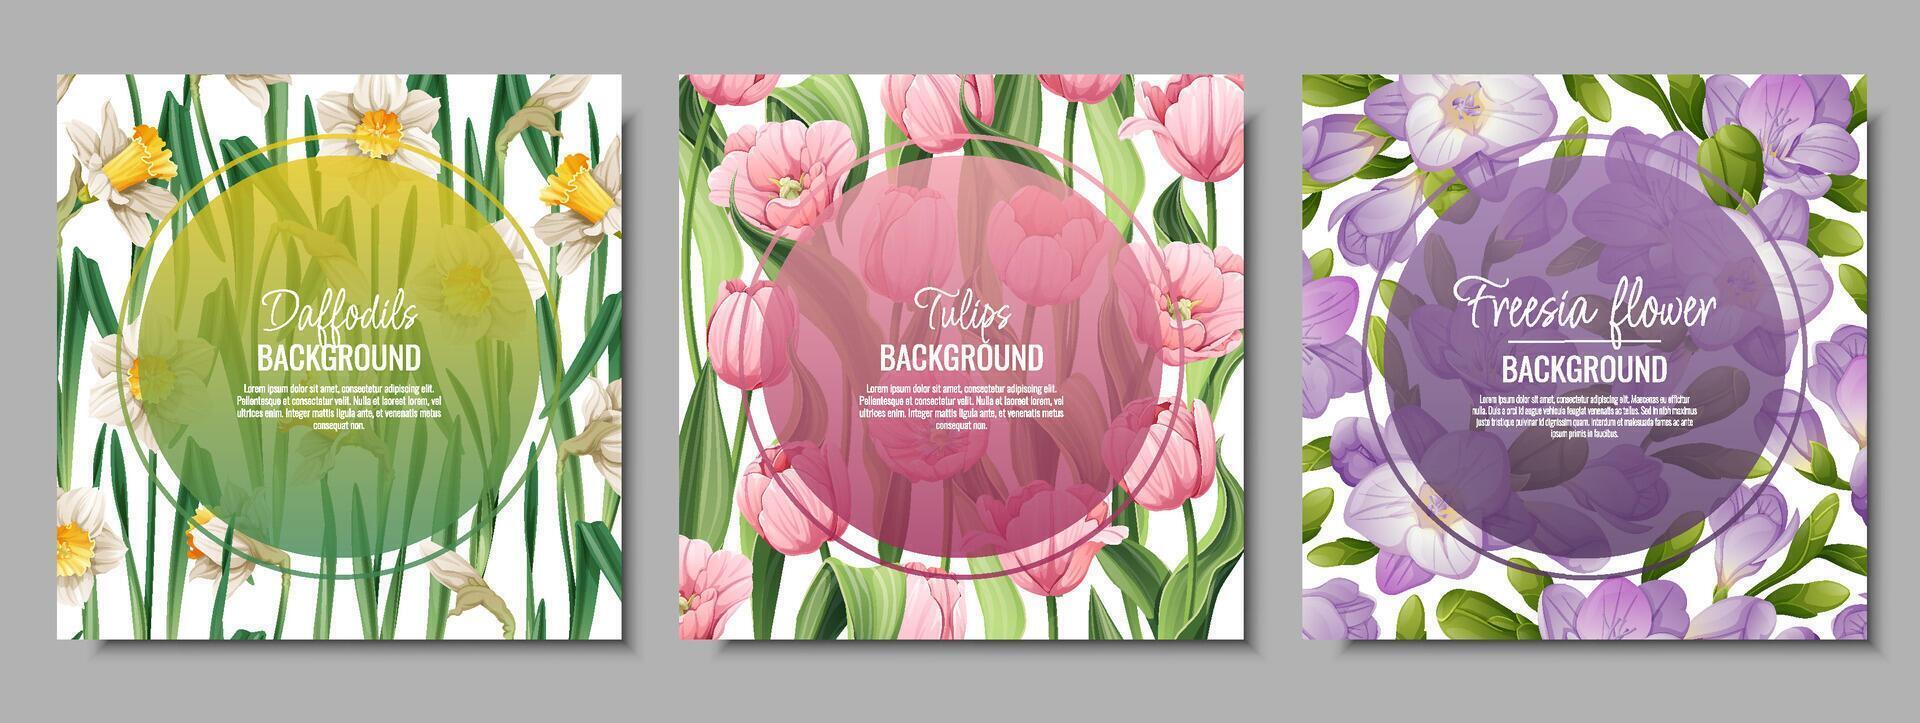 Set of banner templates with spring flowers. Postcard, poster with tulips, daffodils, freesia. illustration of delicate flowers in cartoon style for card, invitation, background, etc. vector